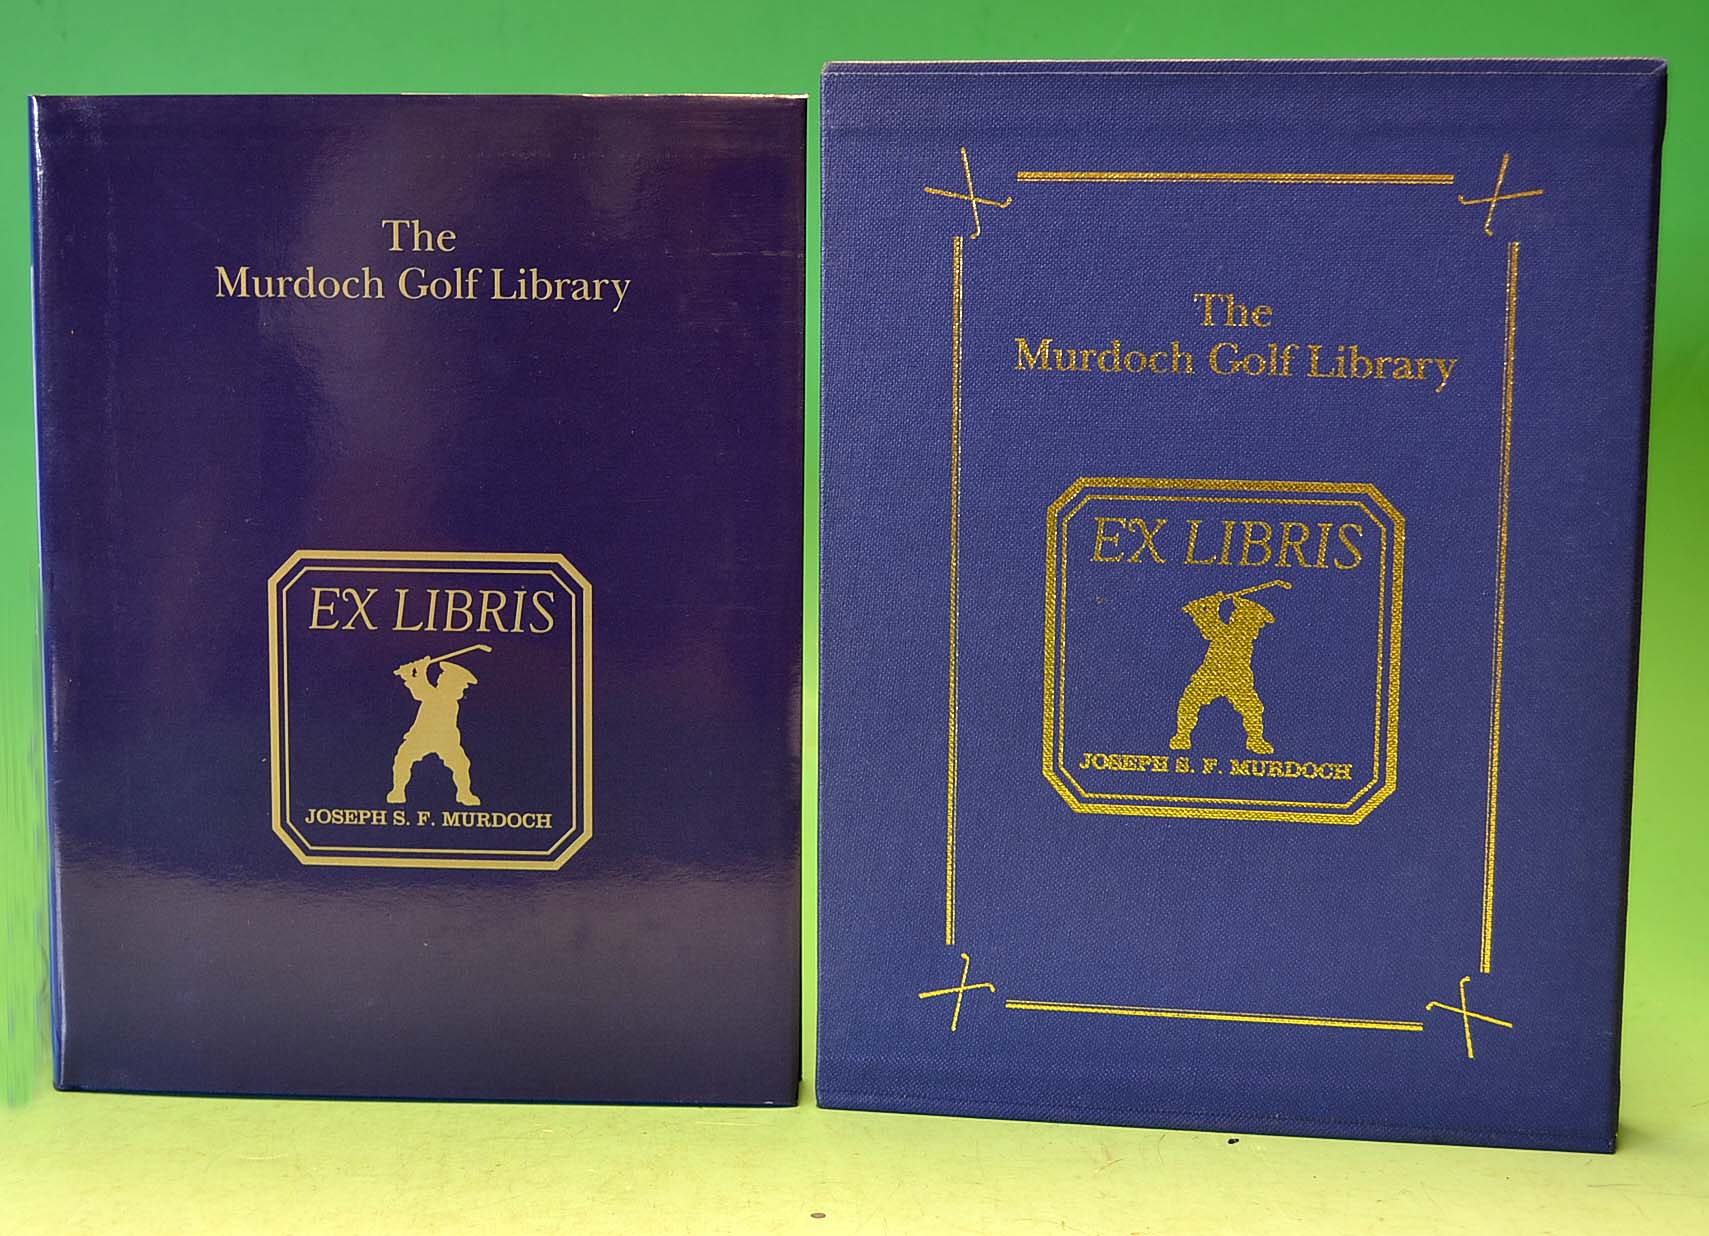 Murdoch, Joseph SF signed – "The Murdoch Golf Library" 1st ed 1991 rare signed by the author to